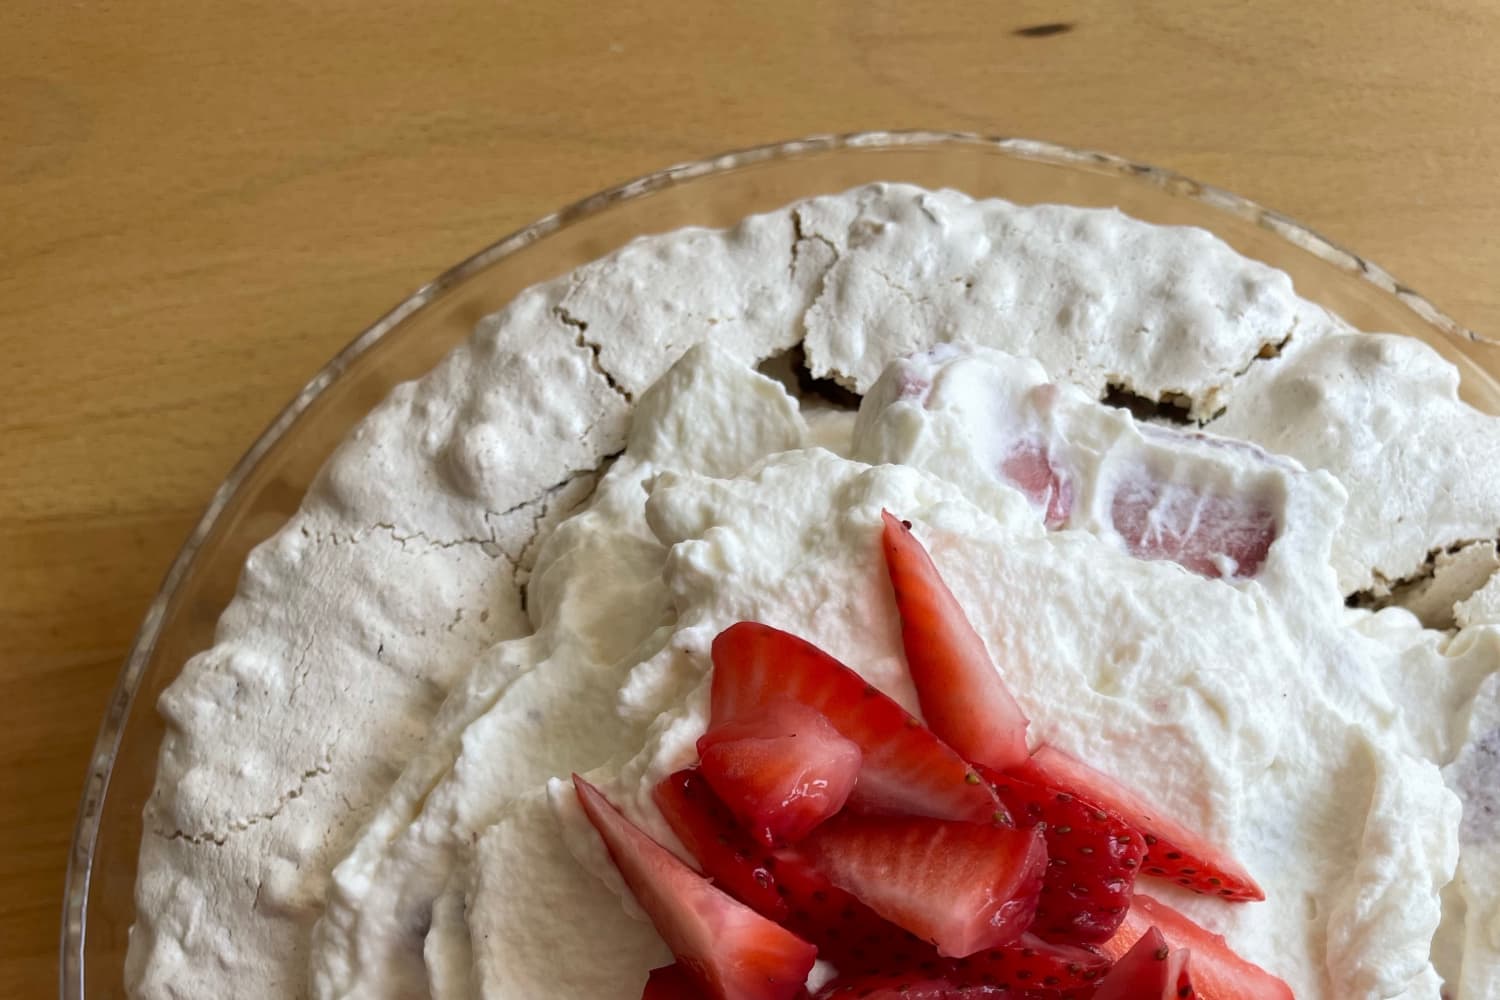 I Tried Jennifer Garner’s Favorite Strawberry Chiffon Pie and It Lives Up to the